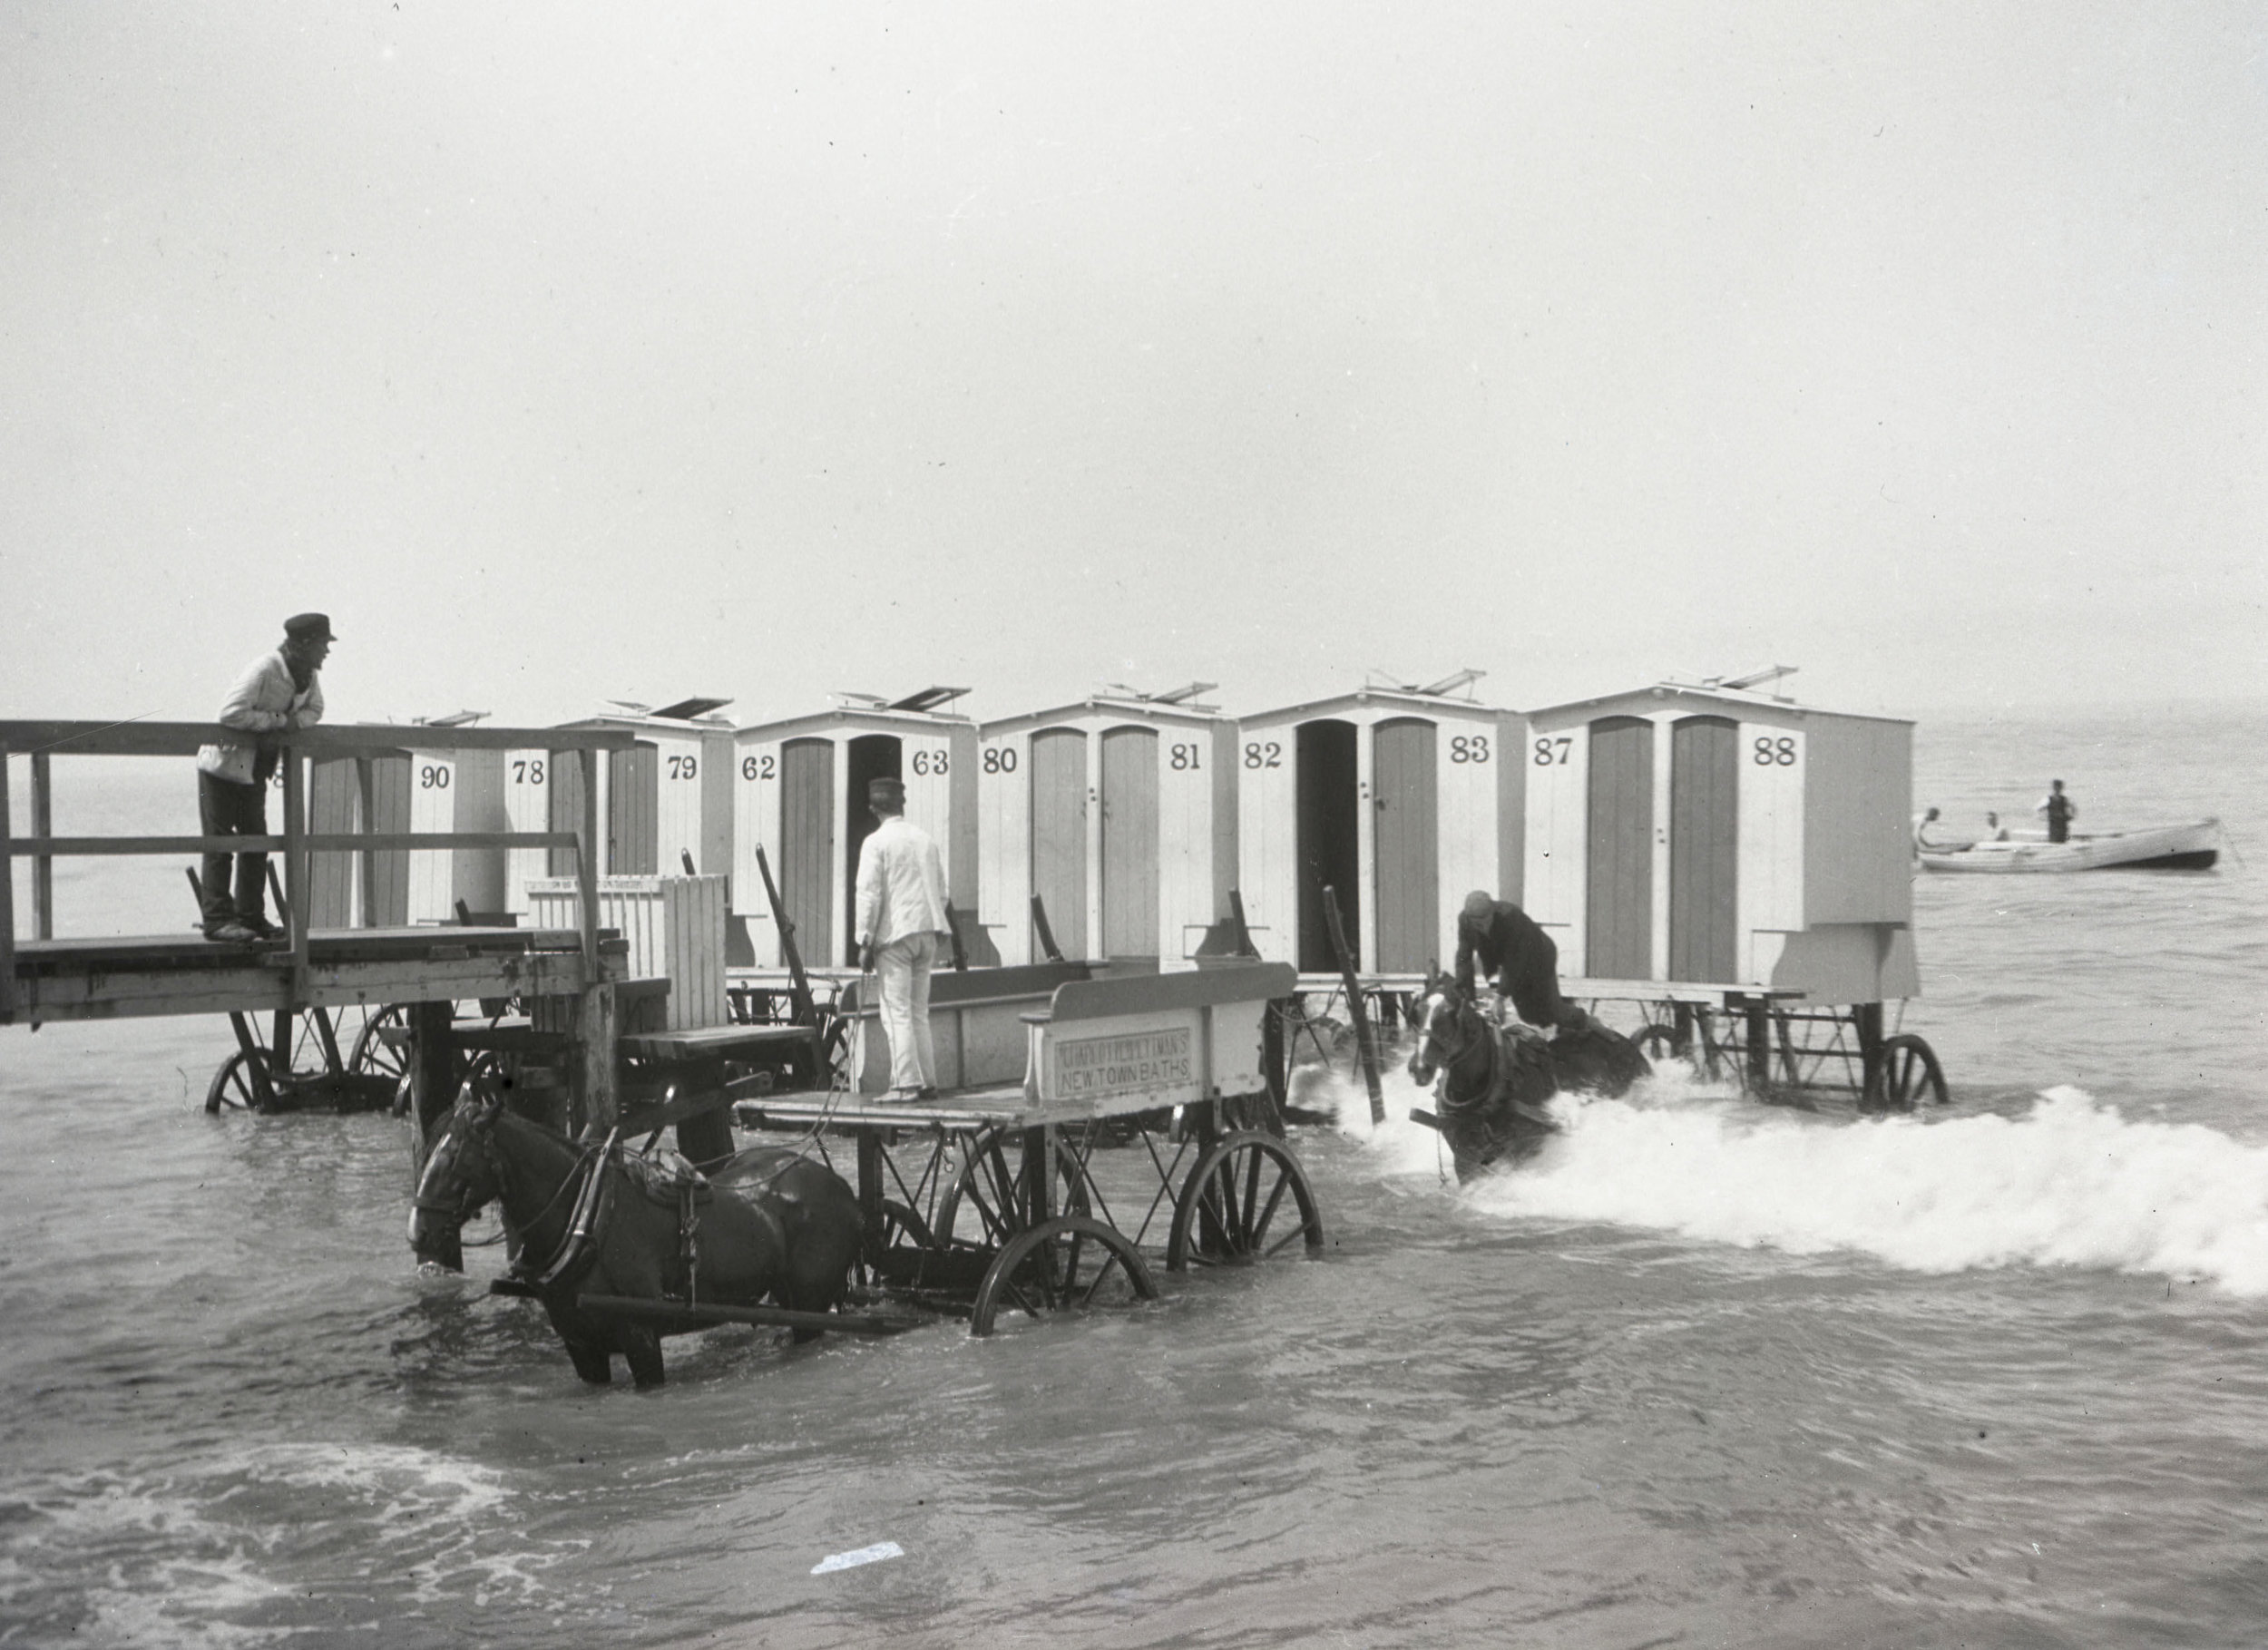  Bathing machines at Margate Beach - these carts were rolled into the sea with horses and served to allow women to preserve their modesty when swimming  